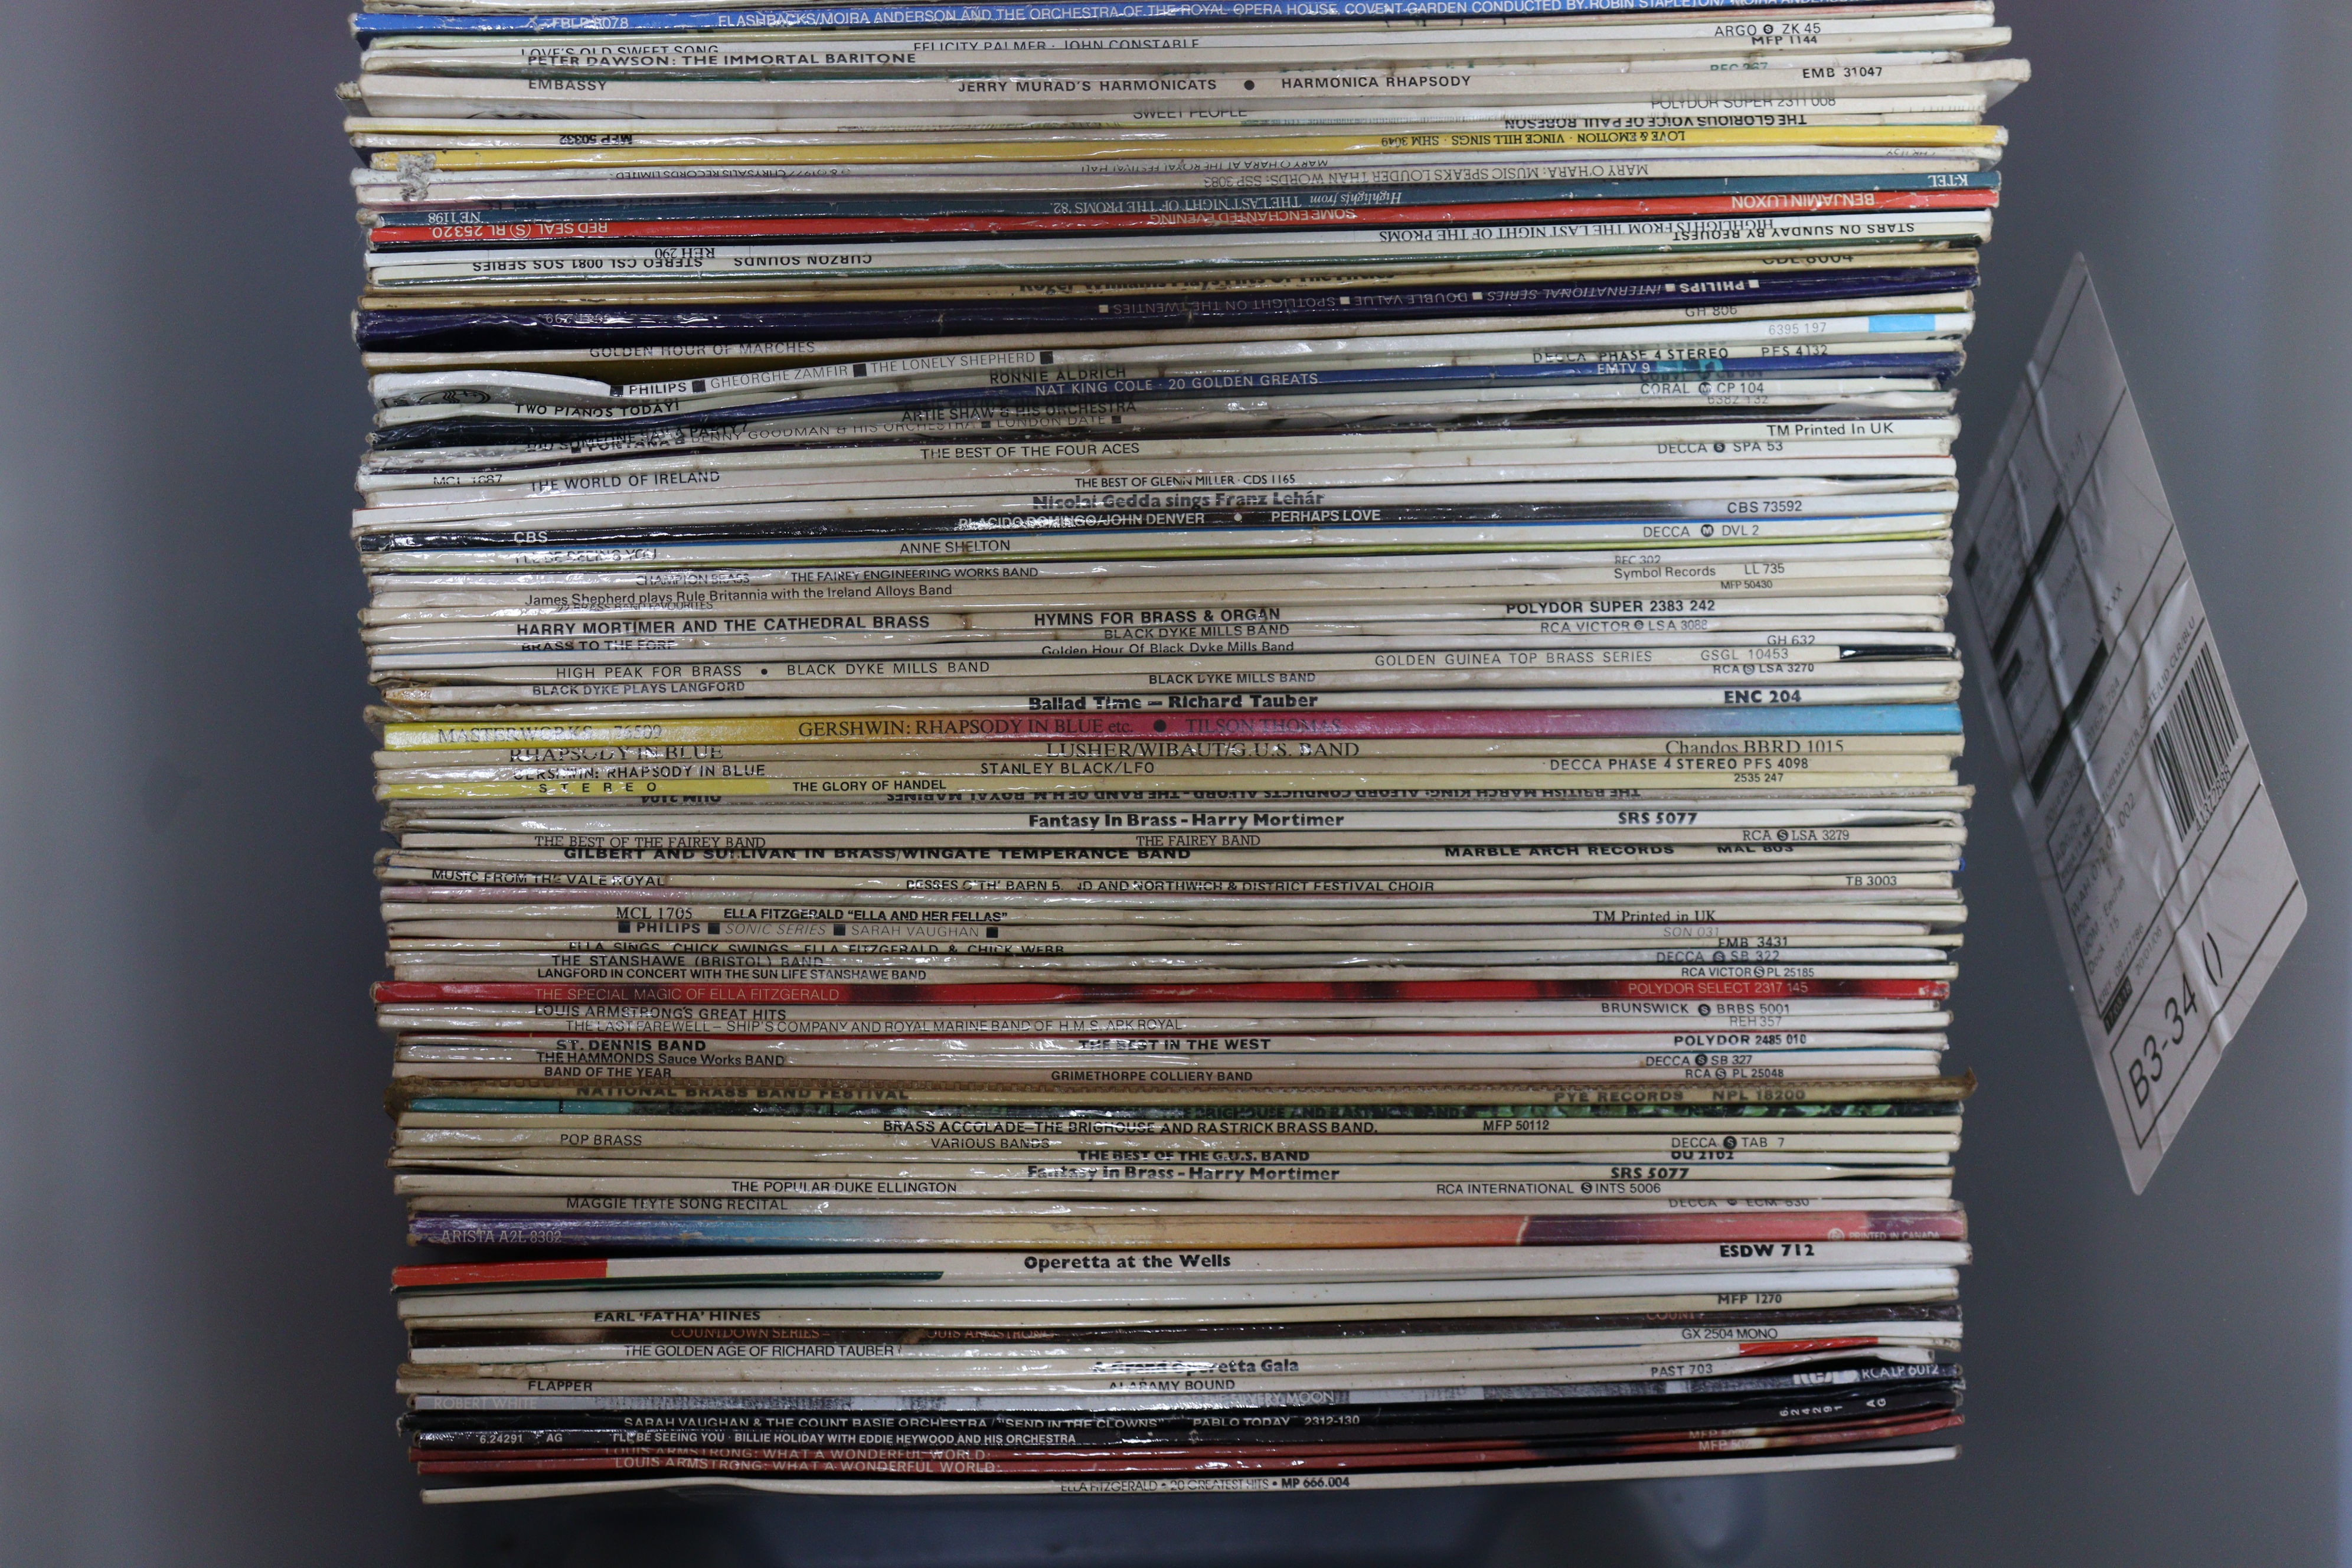 Approximately four hundred various LP records-pop, country, movie soundtracks, etc. - Image 2 of 12